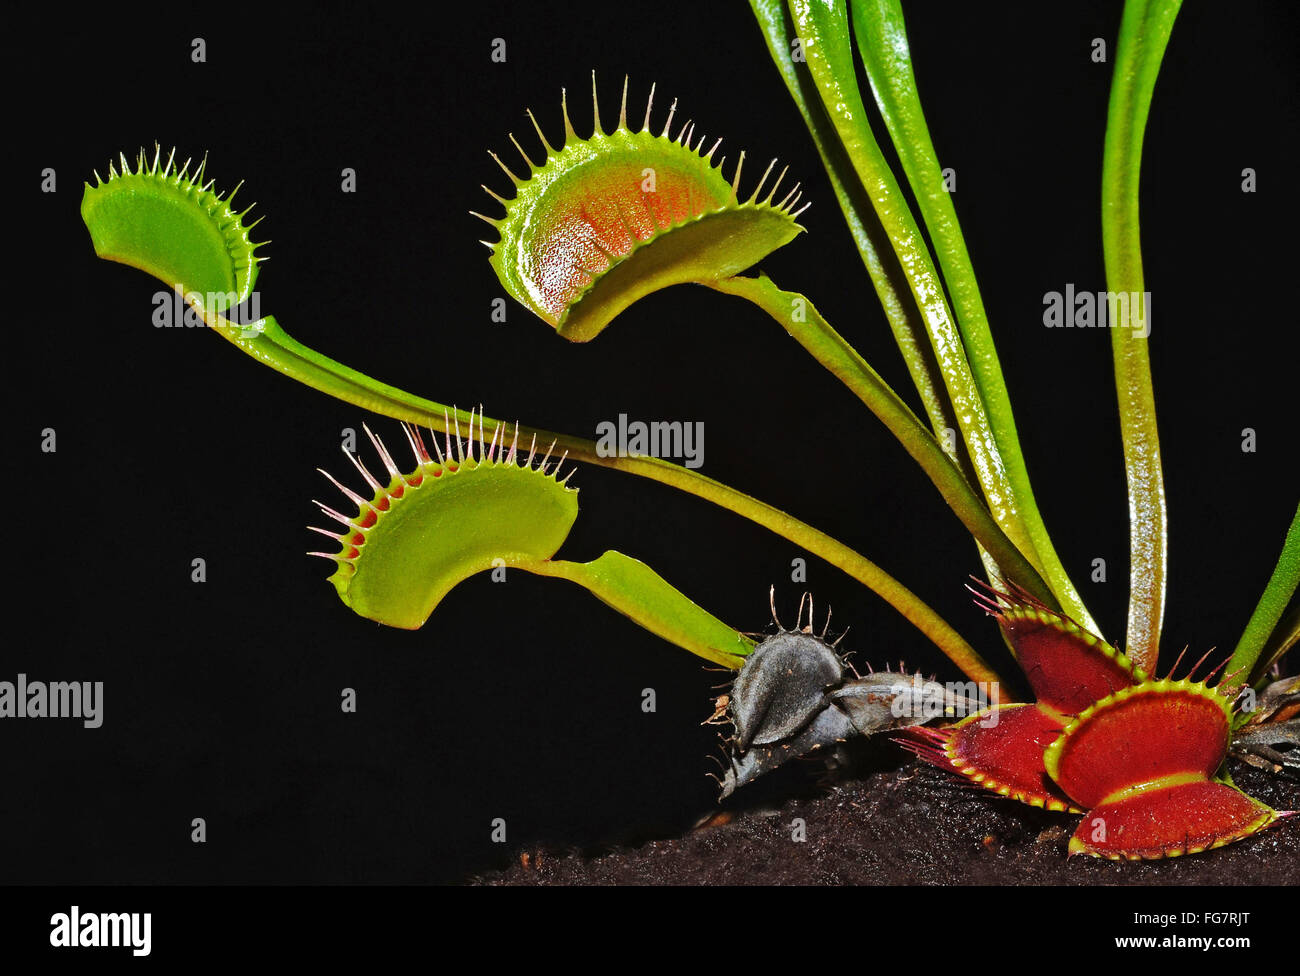 venus fly trap on the black background Stock Photo